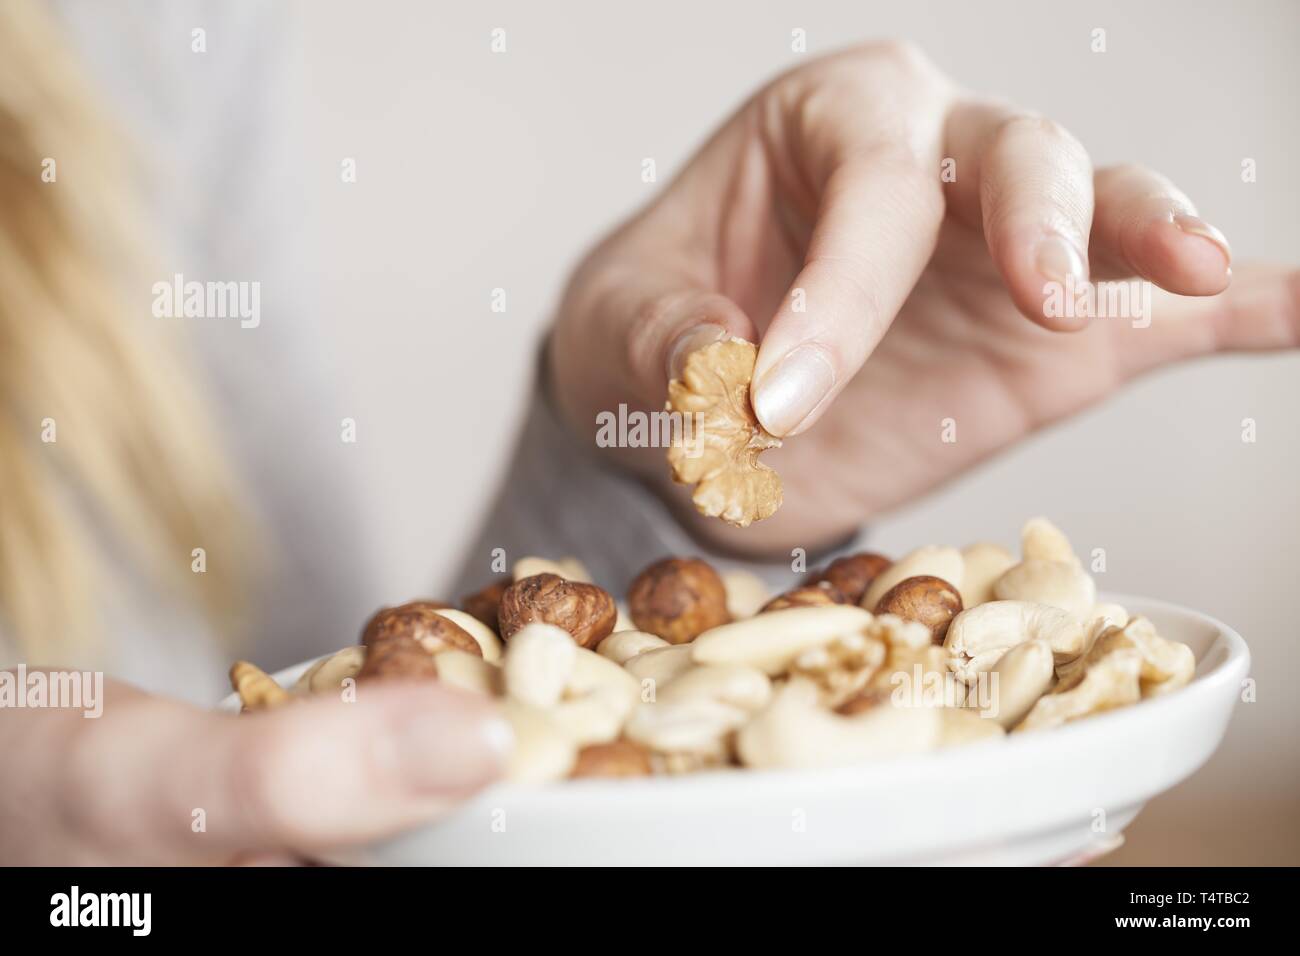 Nut mixture in a bowl Stock Photo